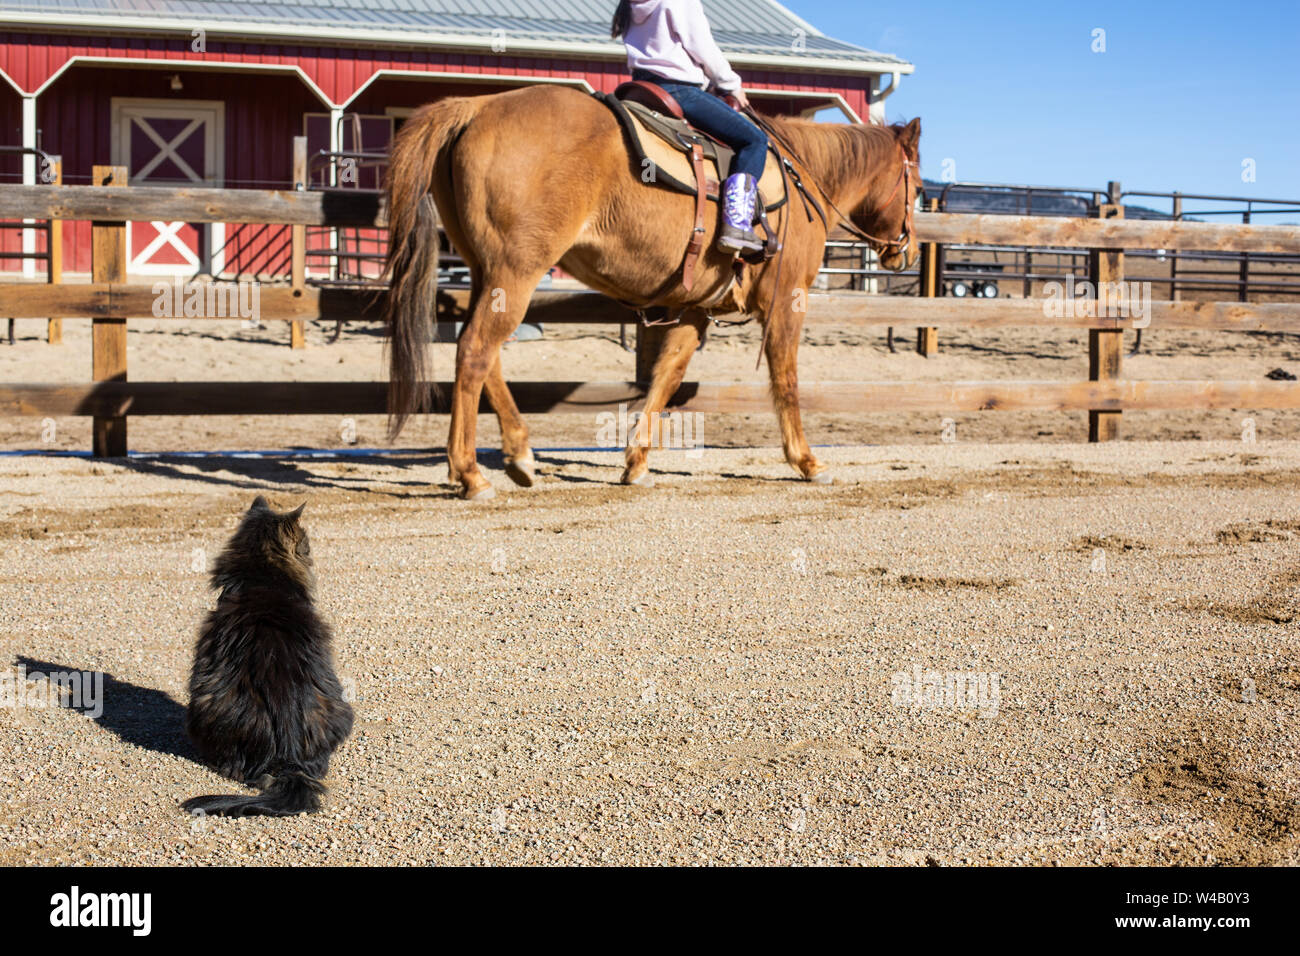 Girl walking her horse in arena with cat watchingq Stock Photo - Alamy